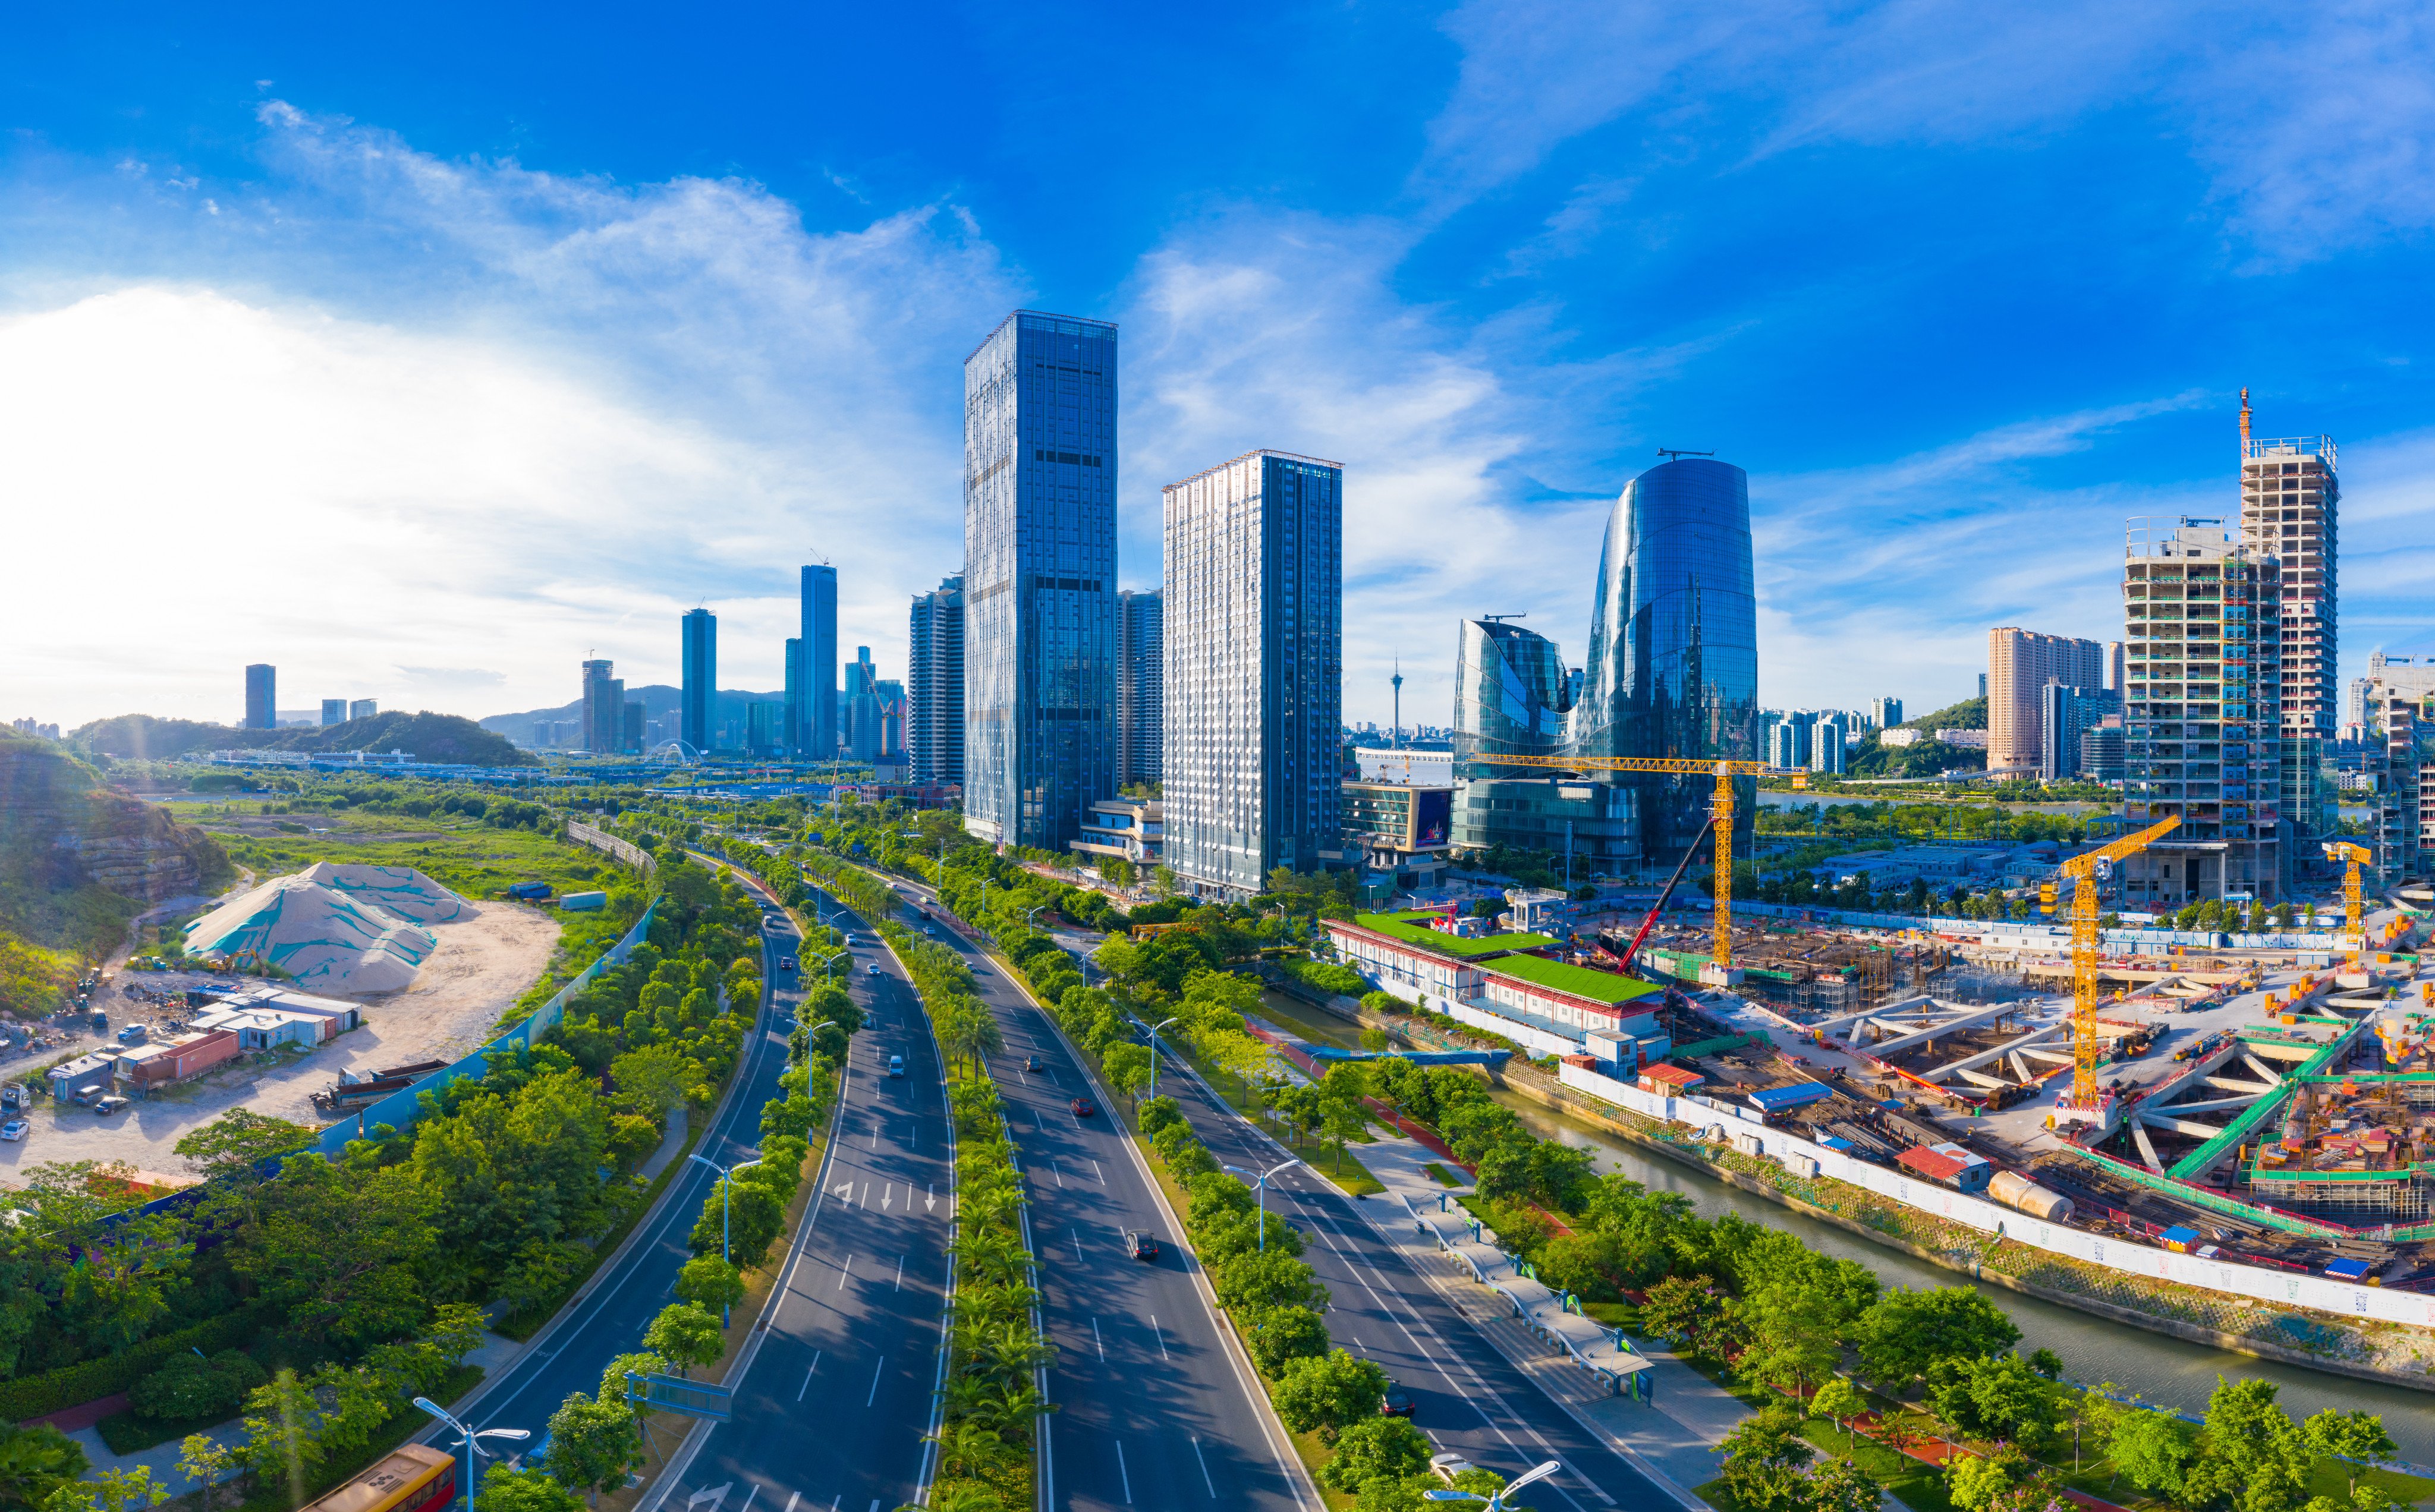 Hengqin (pictured), Nansha, and Qianhai are accelerating their roll-out of preferential tax systems, legal frameworks and streamlined application procedures to encourage more offshore funds. Photo: Shutterstock